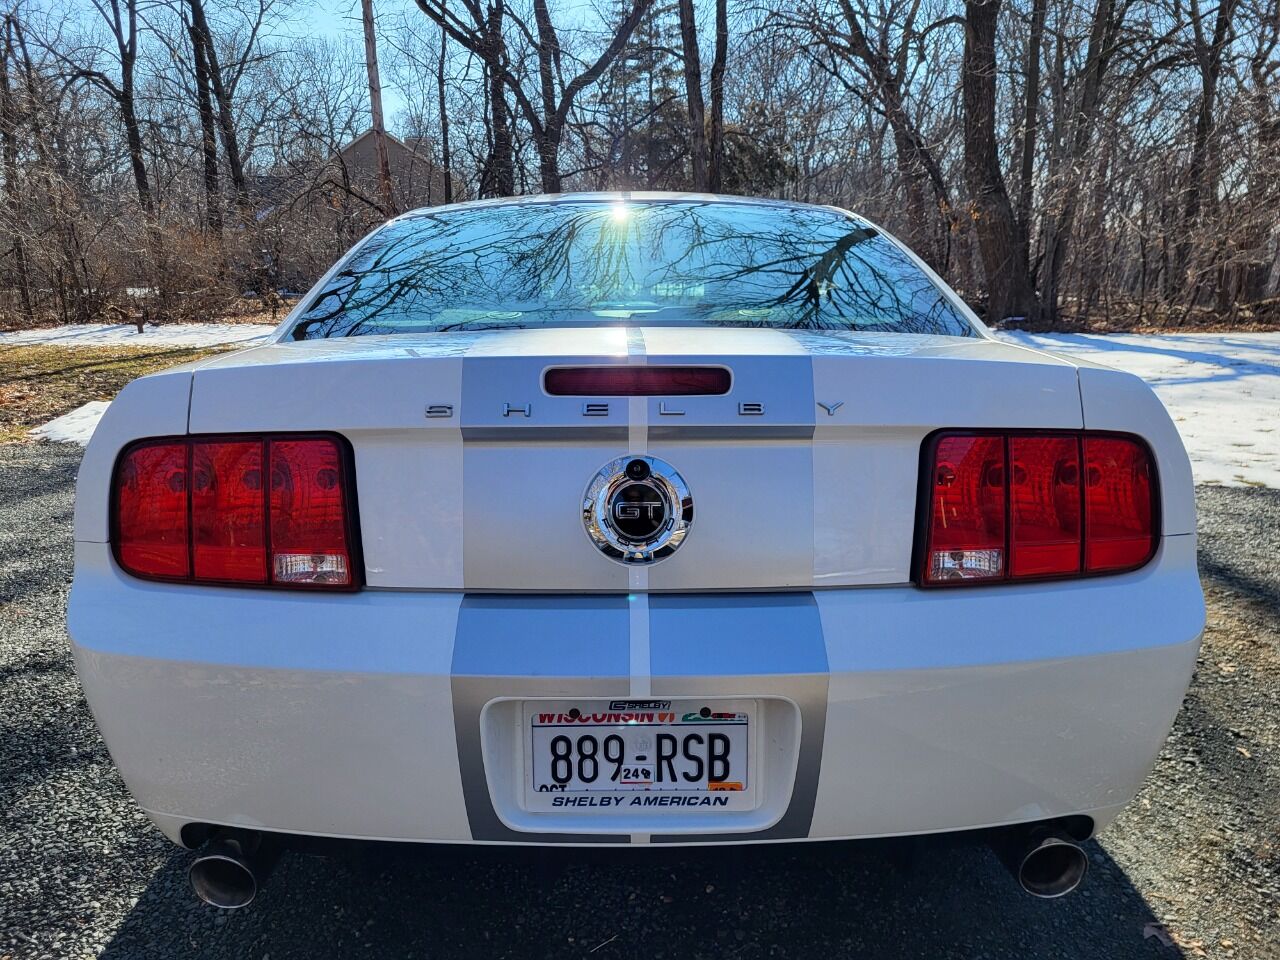 2007 Ford Mustang 21